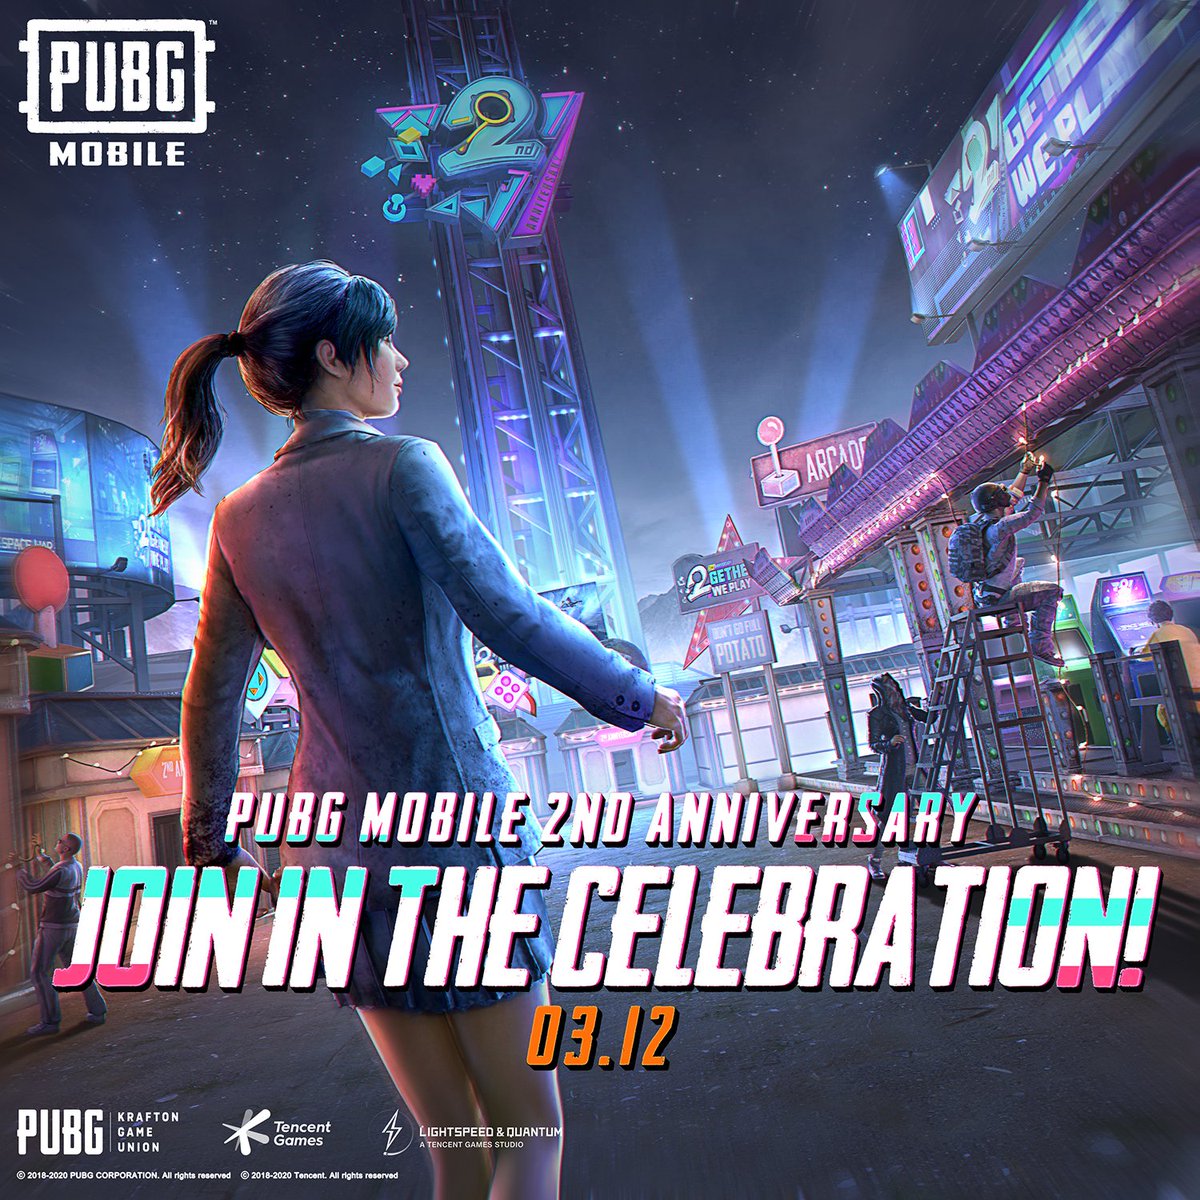 O Xrhsths Pubg Mobile Sto Twitter The Arcade Is Almost Ready Join Us This March 12th To Celebrate Pubg Mobile Turning 2 Years Old Pubgm Pubgmobile 2getherweplay T Co Pgzqvevpaz